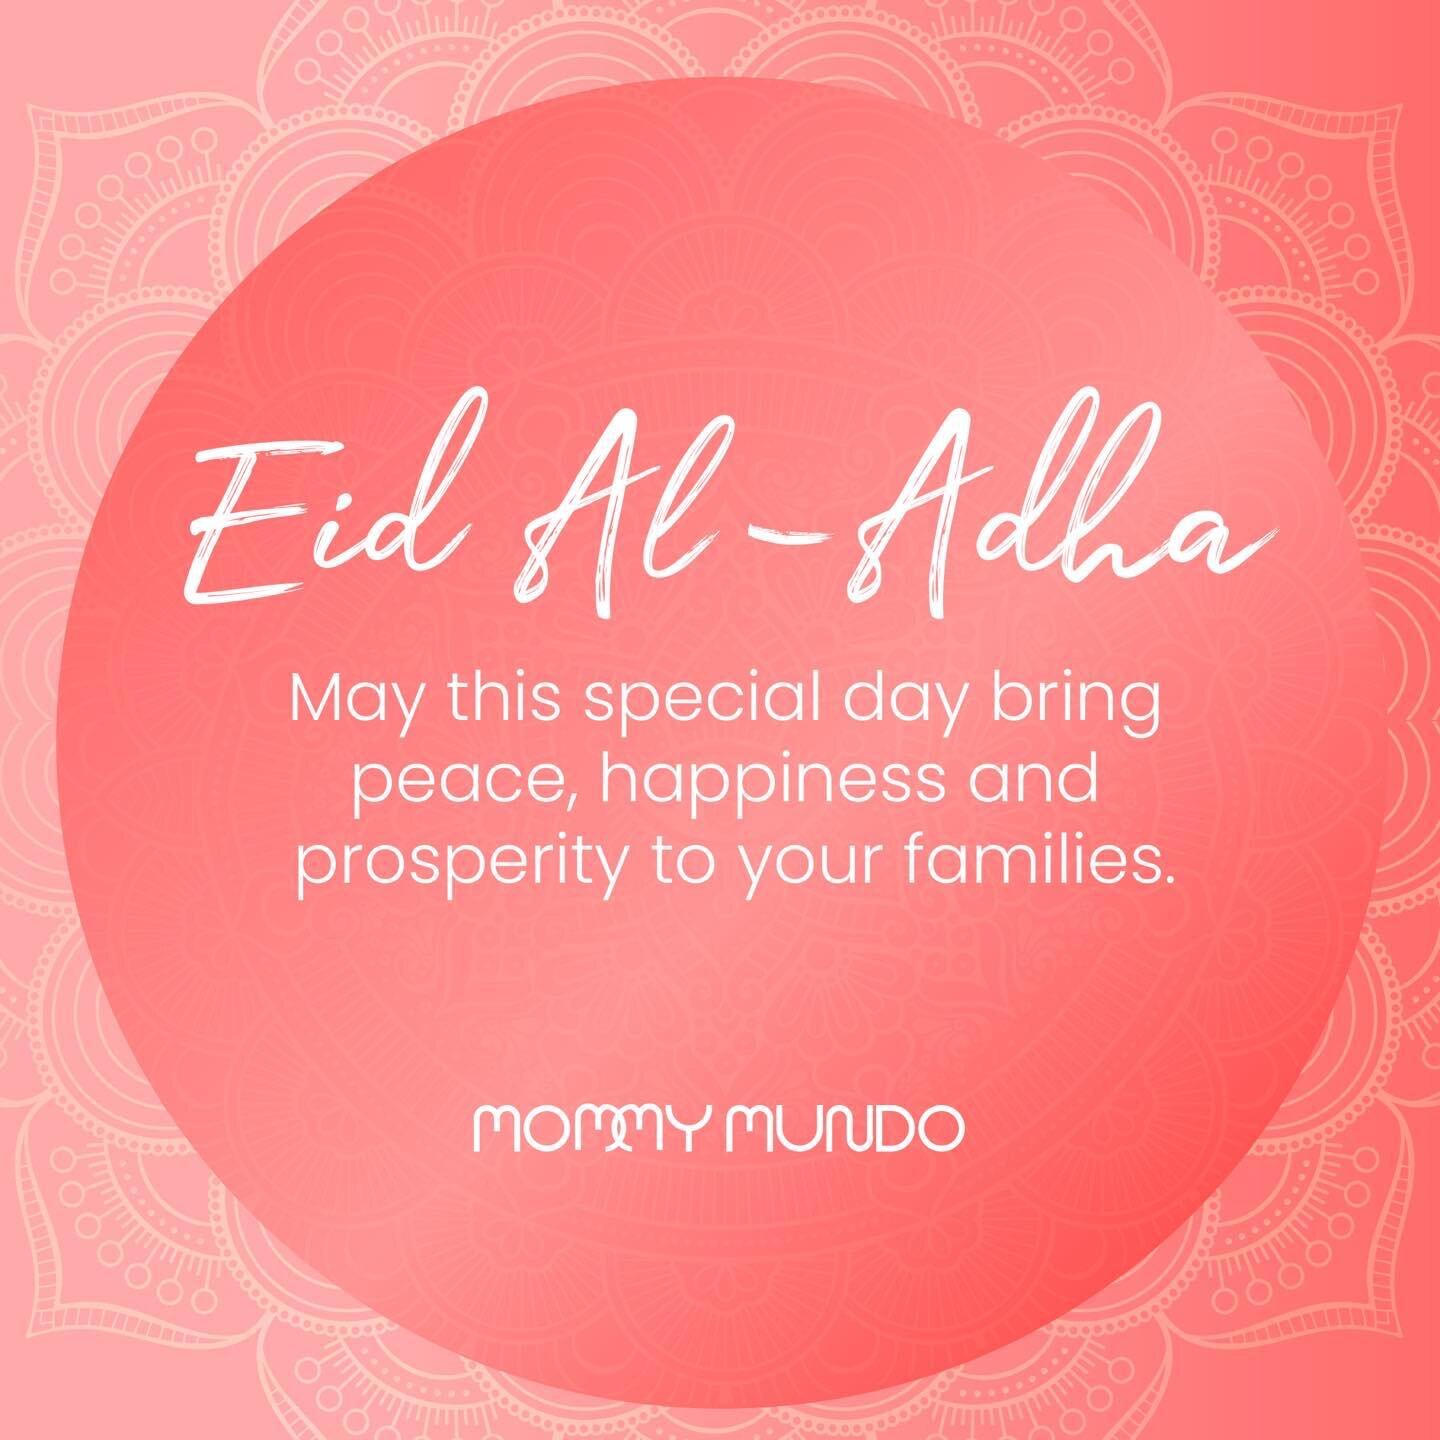 Eid Mubarak. Peace and love to you and your family.